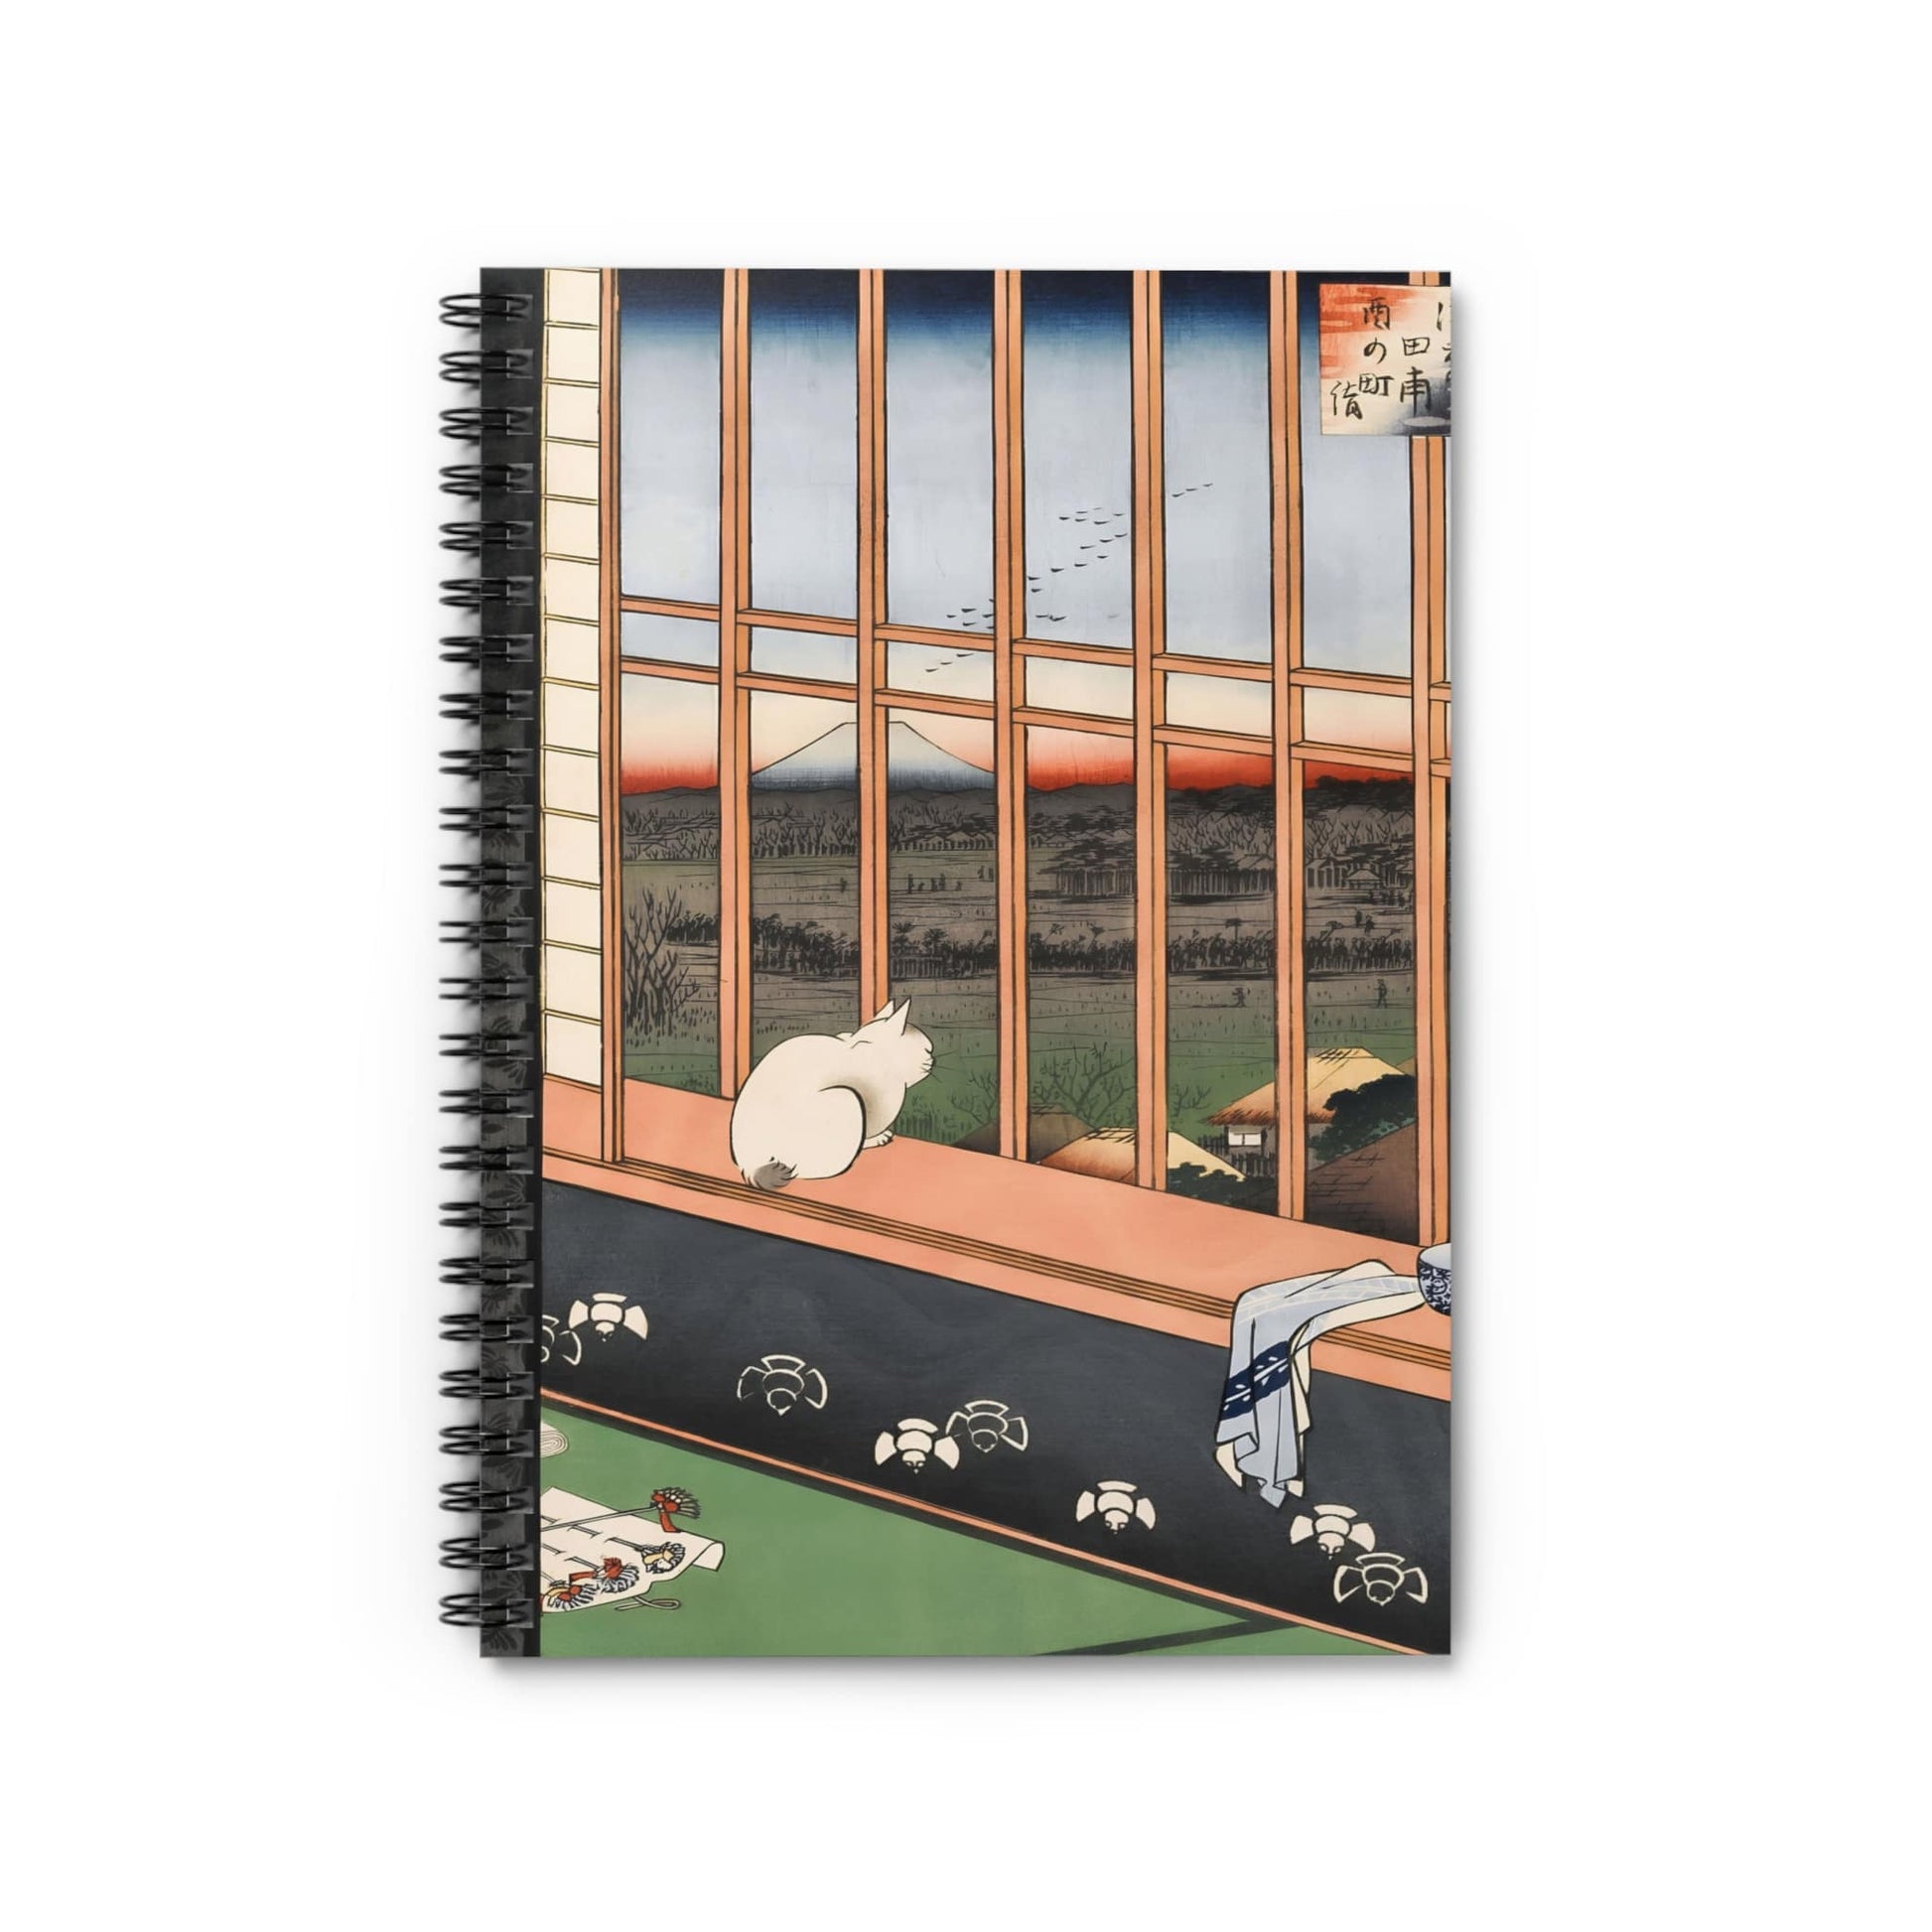 Ukiyo-e Cat Notebook with Japanese cat cover, perfect for journaling and planning, featuring charming ukiyo-e cat designs.